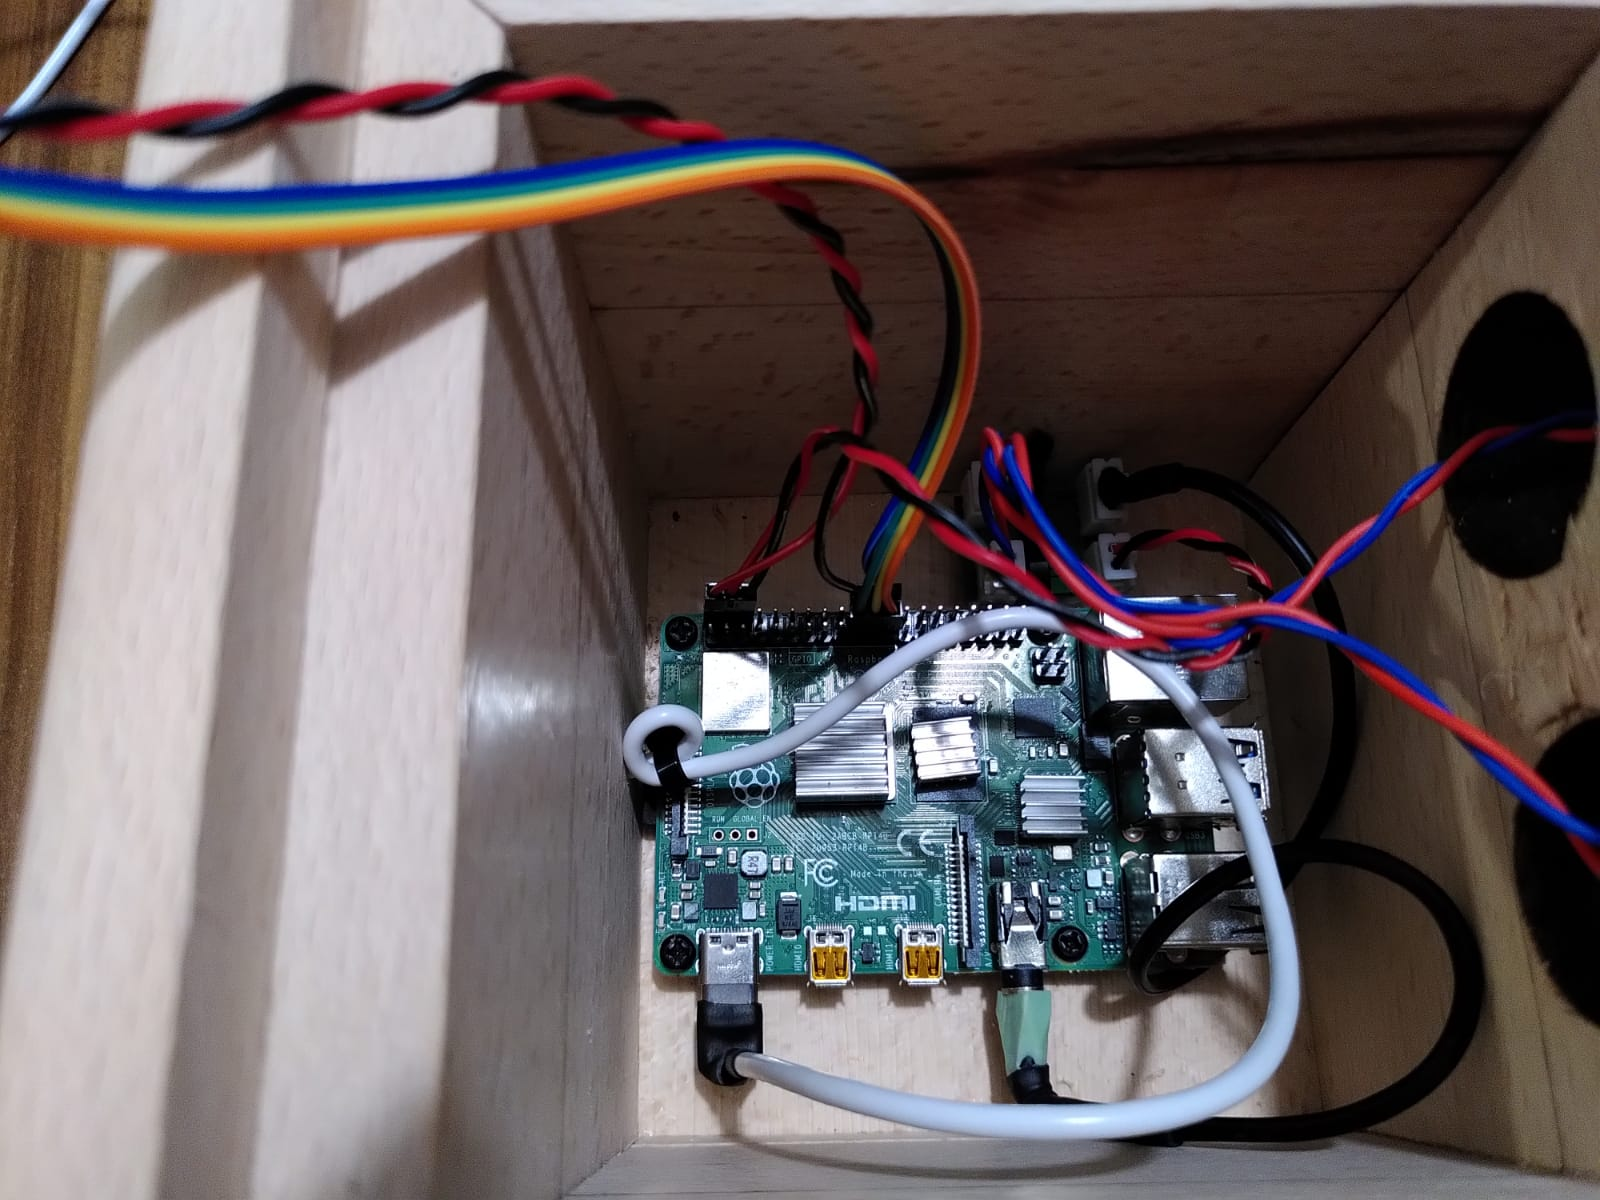 Wooden box with built-in raspberry pi